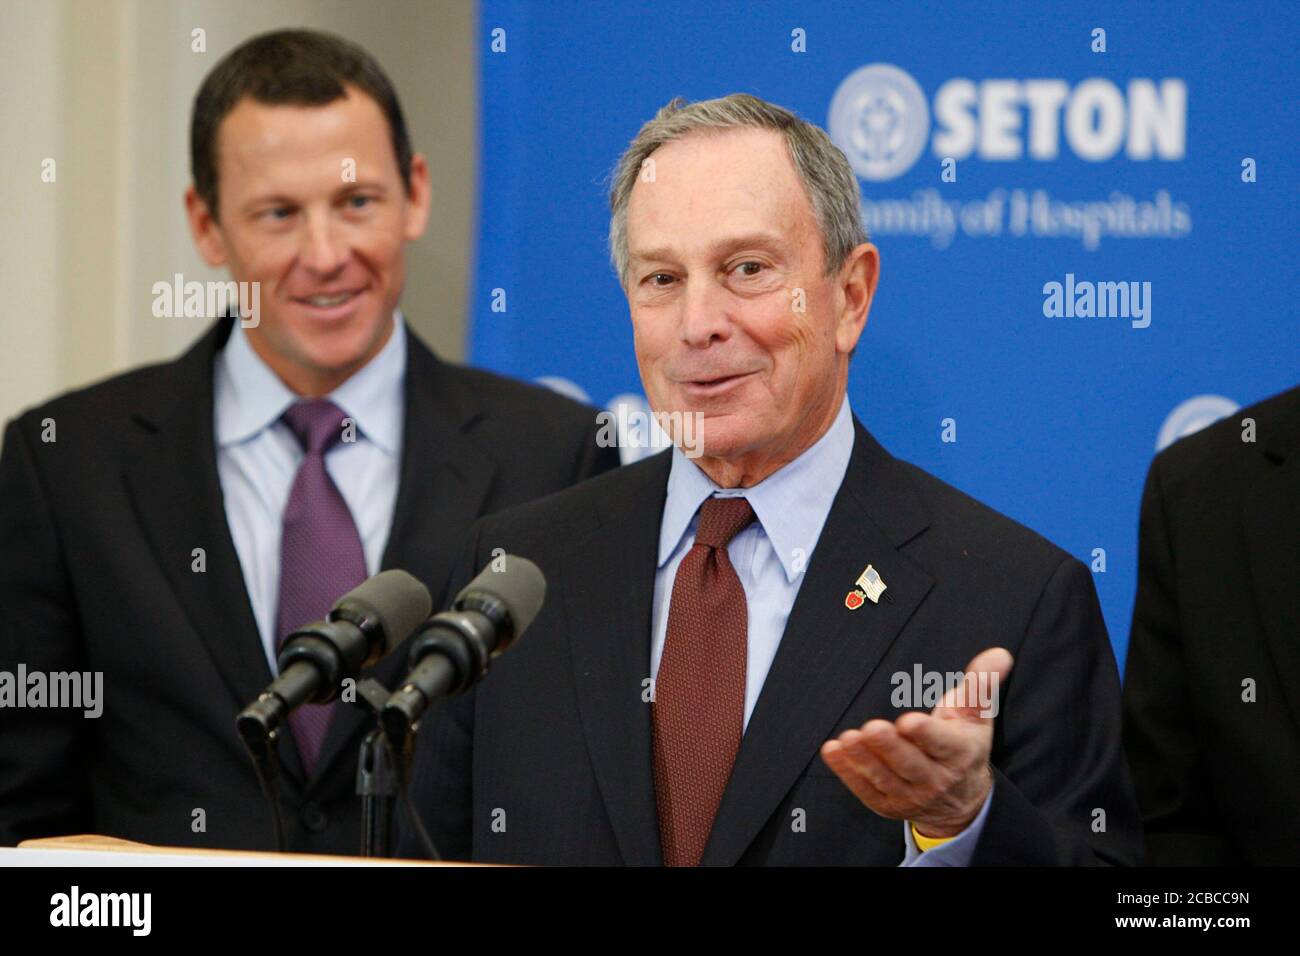 Austin, Texas USA, January 18, 2008: New York City Mayor Michael Bloomberg speaks to reporters about a new cancer health initiative as professional cyclist, cancer survivor and initiative supporter Lance Armstrong listens.  ©Bob Daemmrich Stock Photo